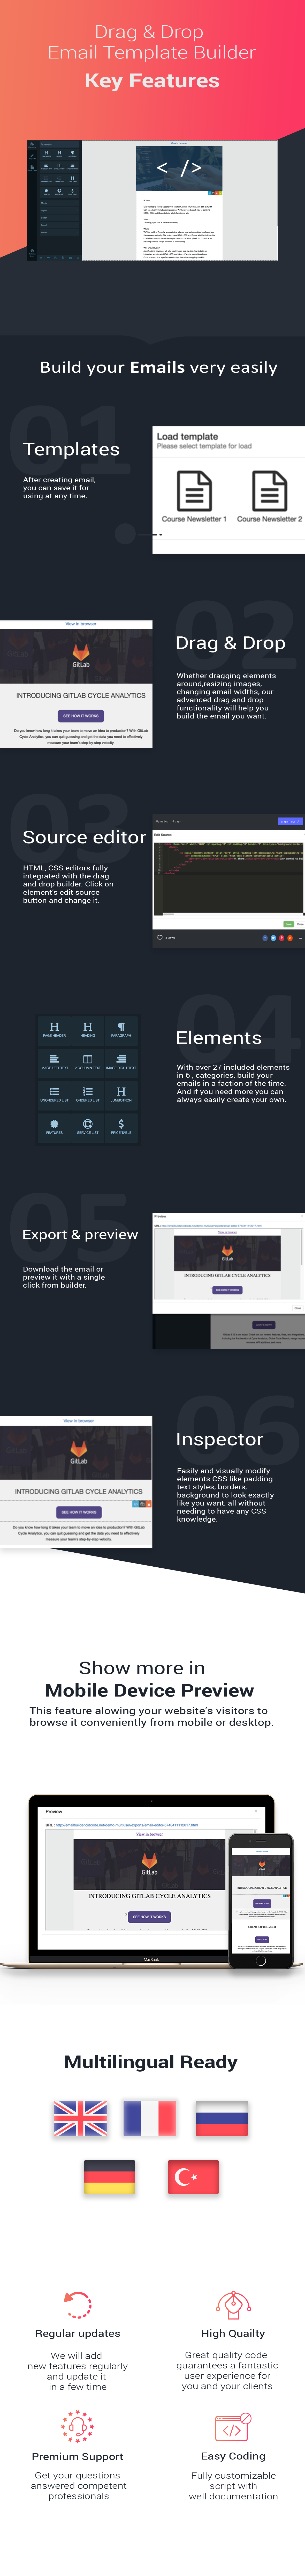 Content Builder Js Nulled Php